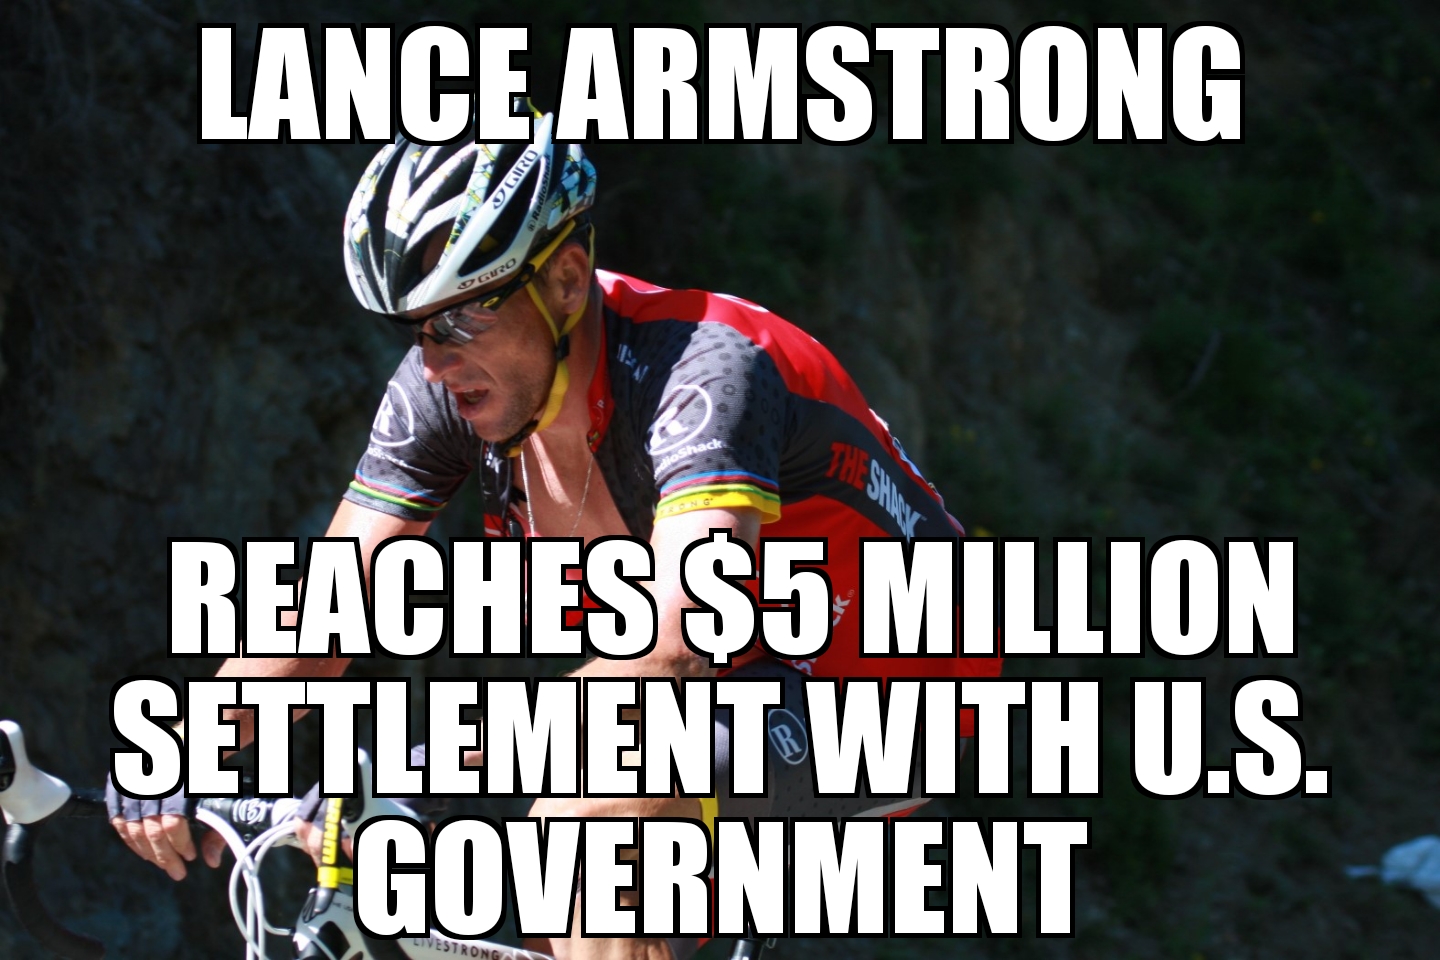 Lance Armstrong settles with U.S. government